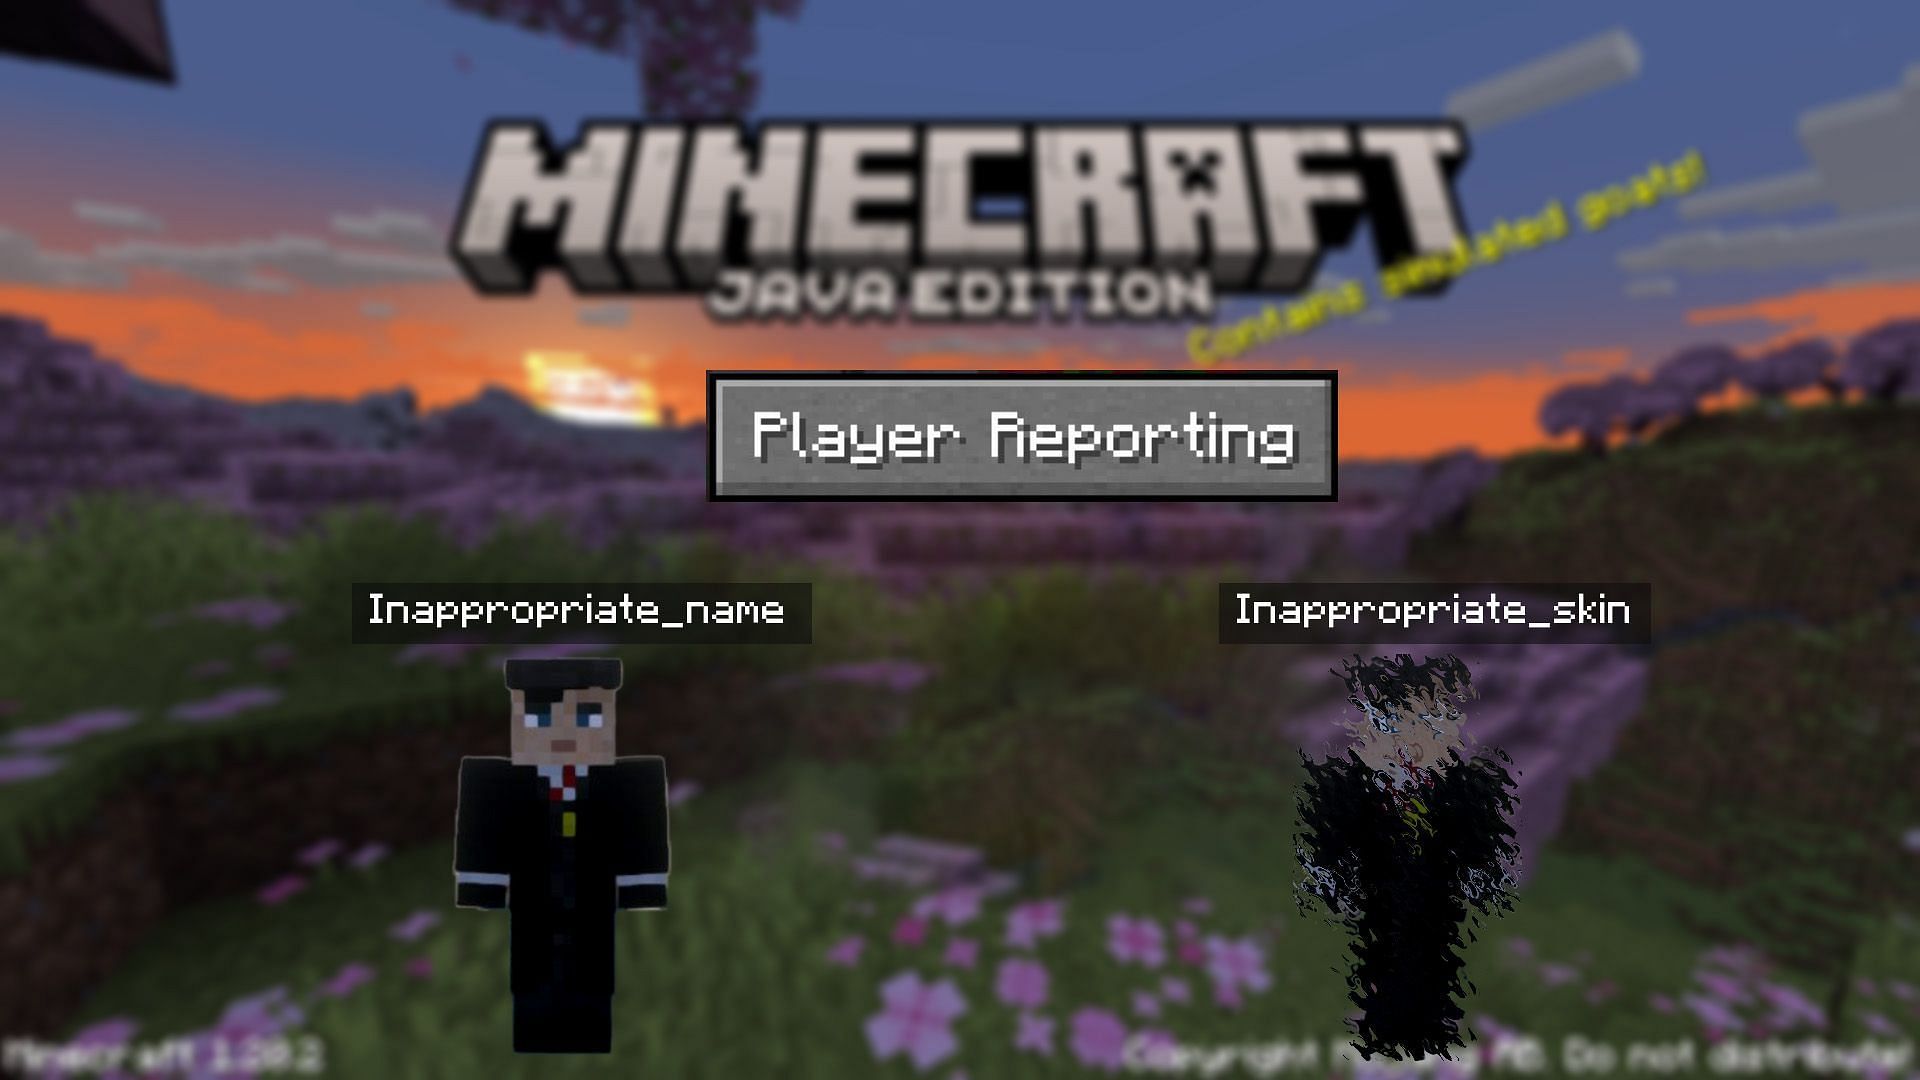 The new reporting system filters inappropriate skins and names in Minecraft (Image via Mojang)